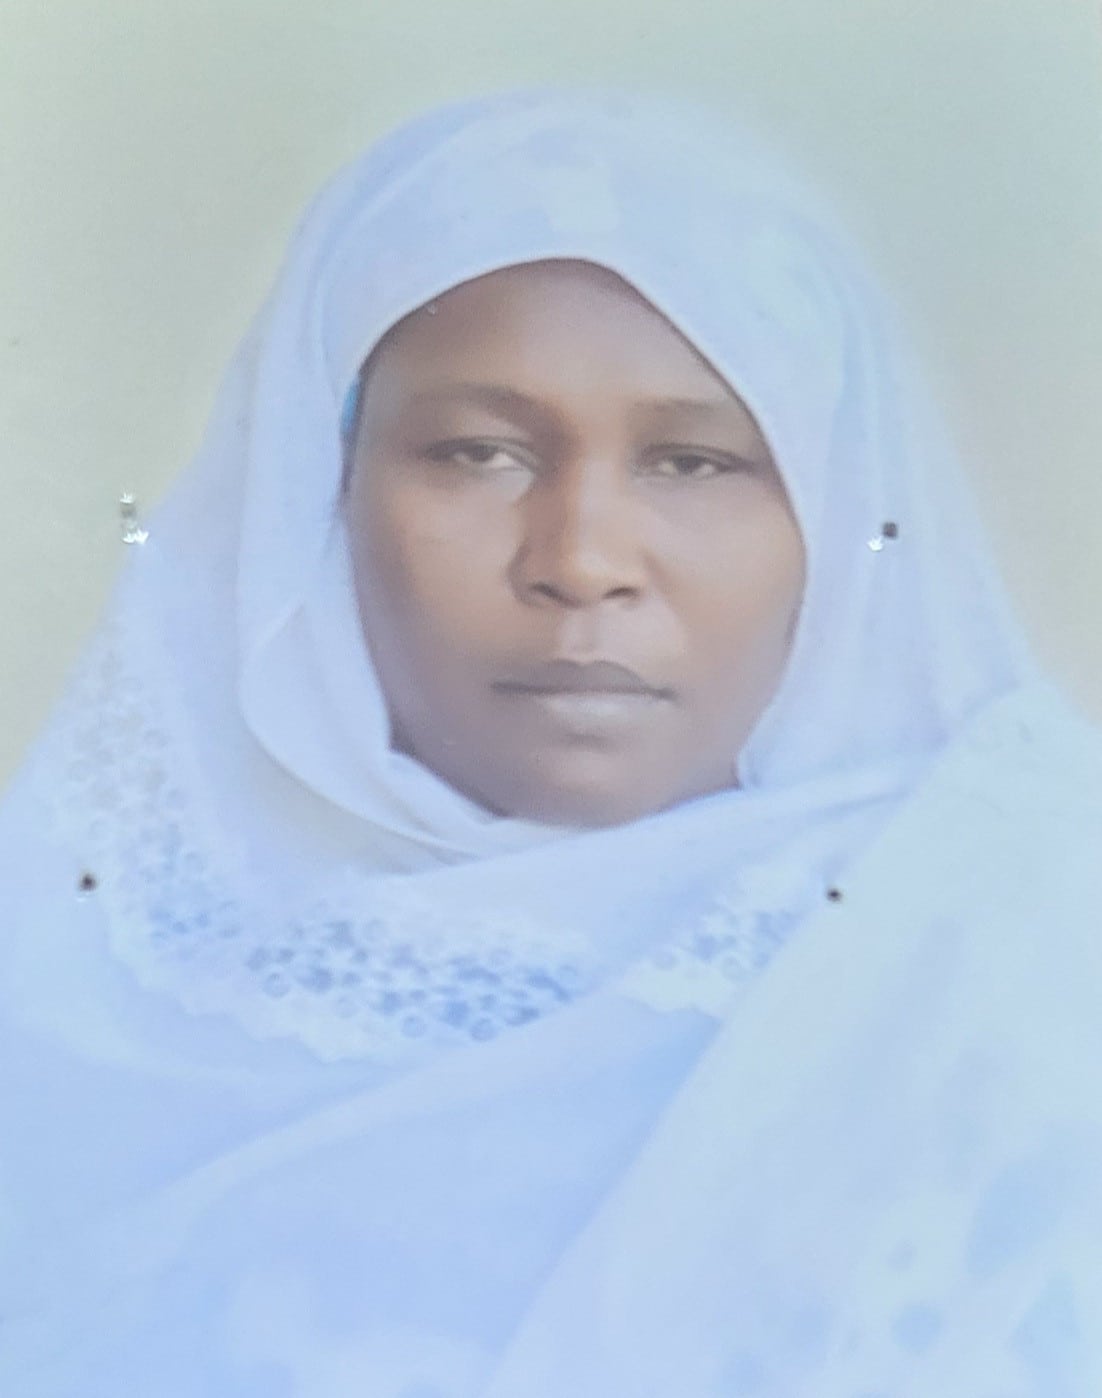 EFCC Arraigns Woman Over Alleged ₦32m Oil Scam In Kano